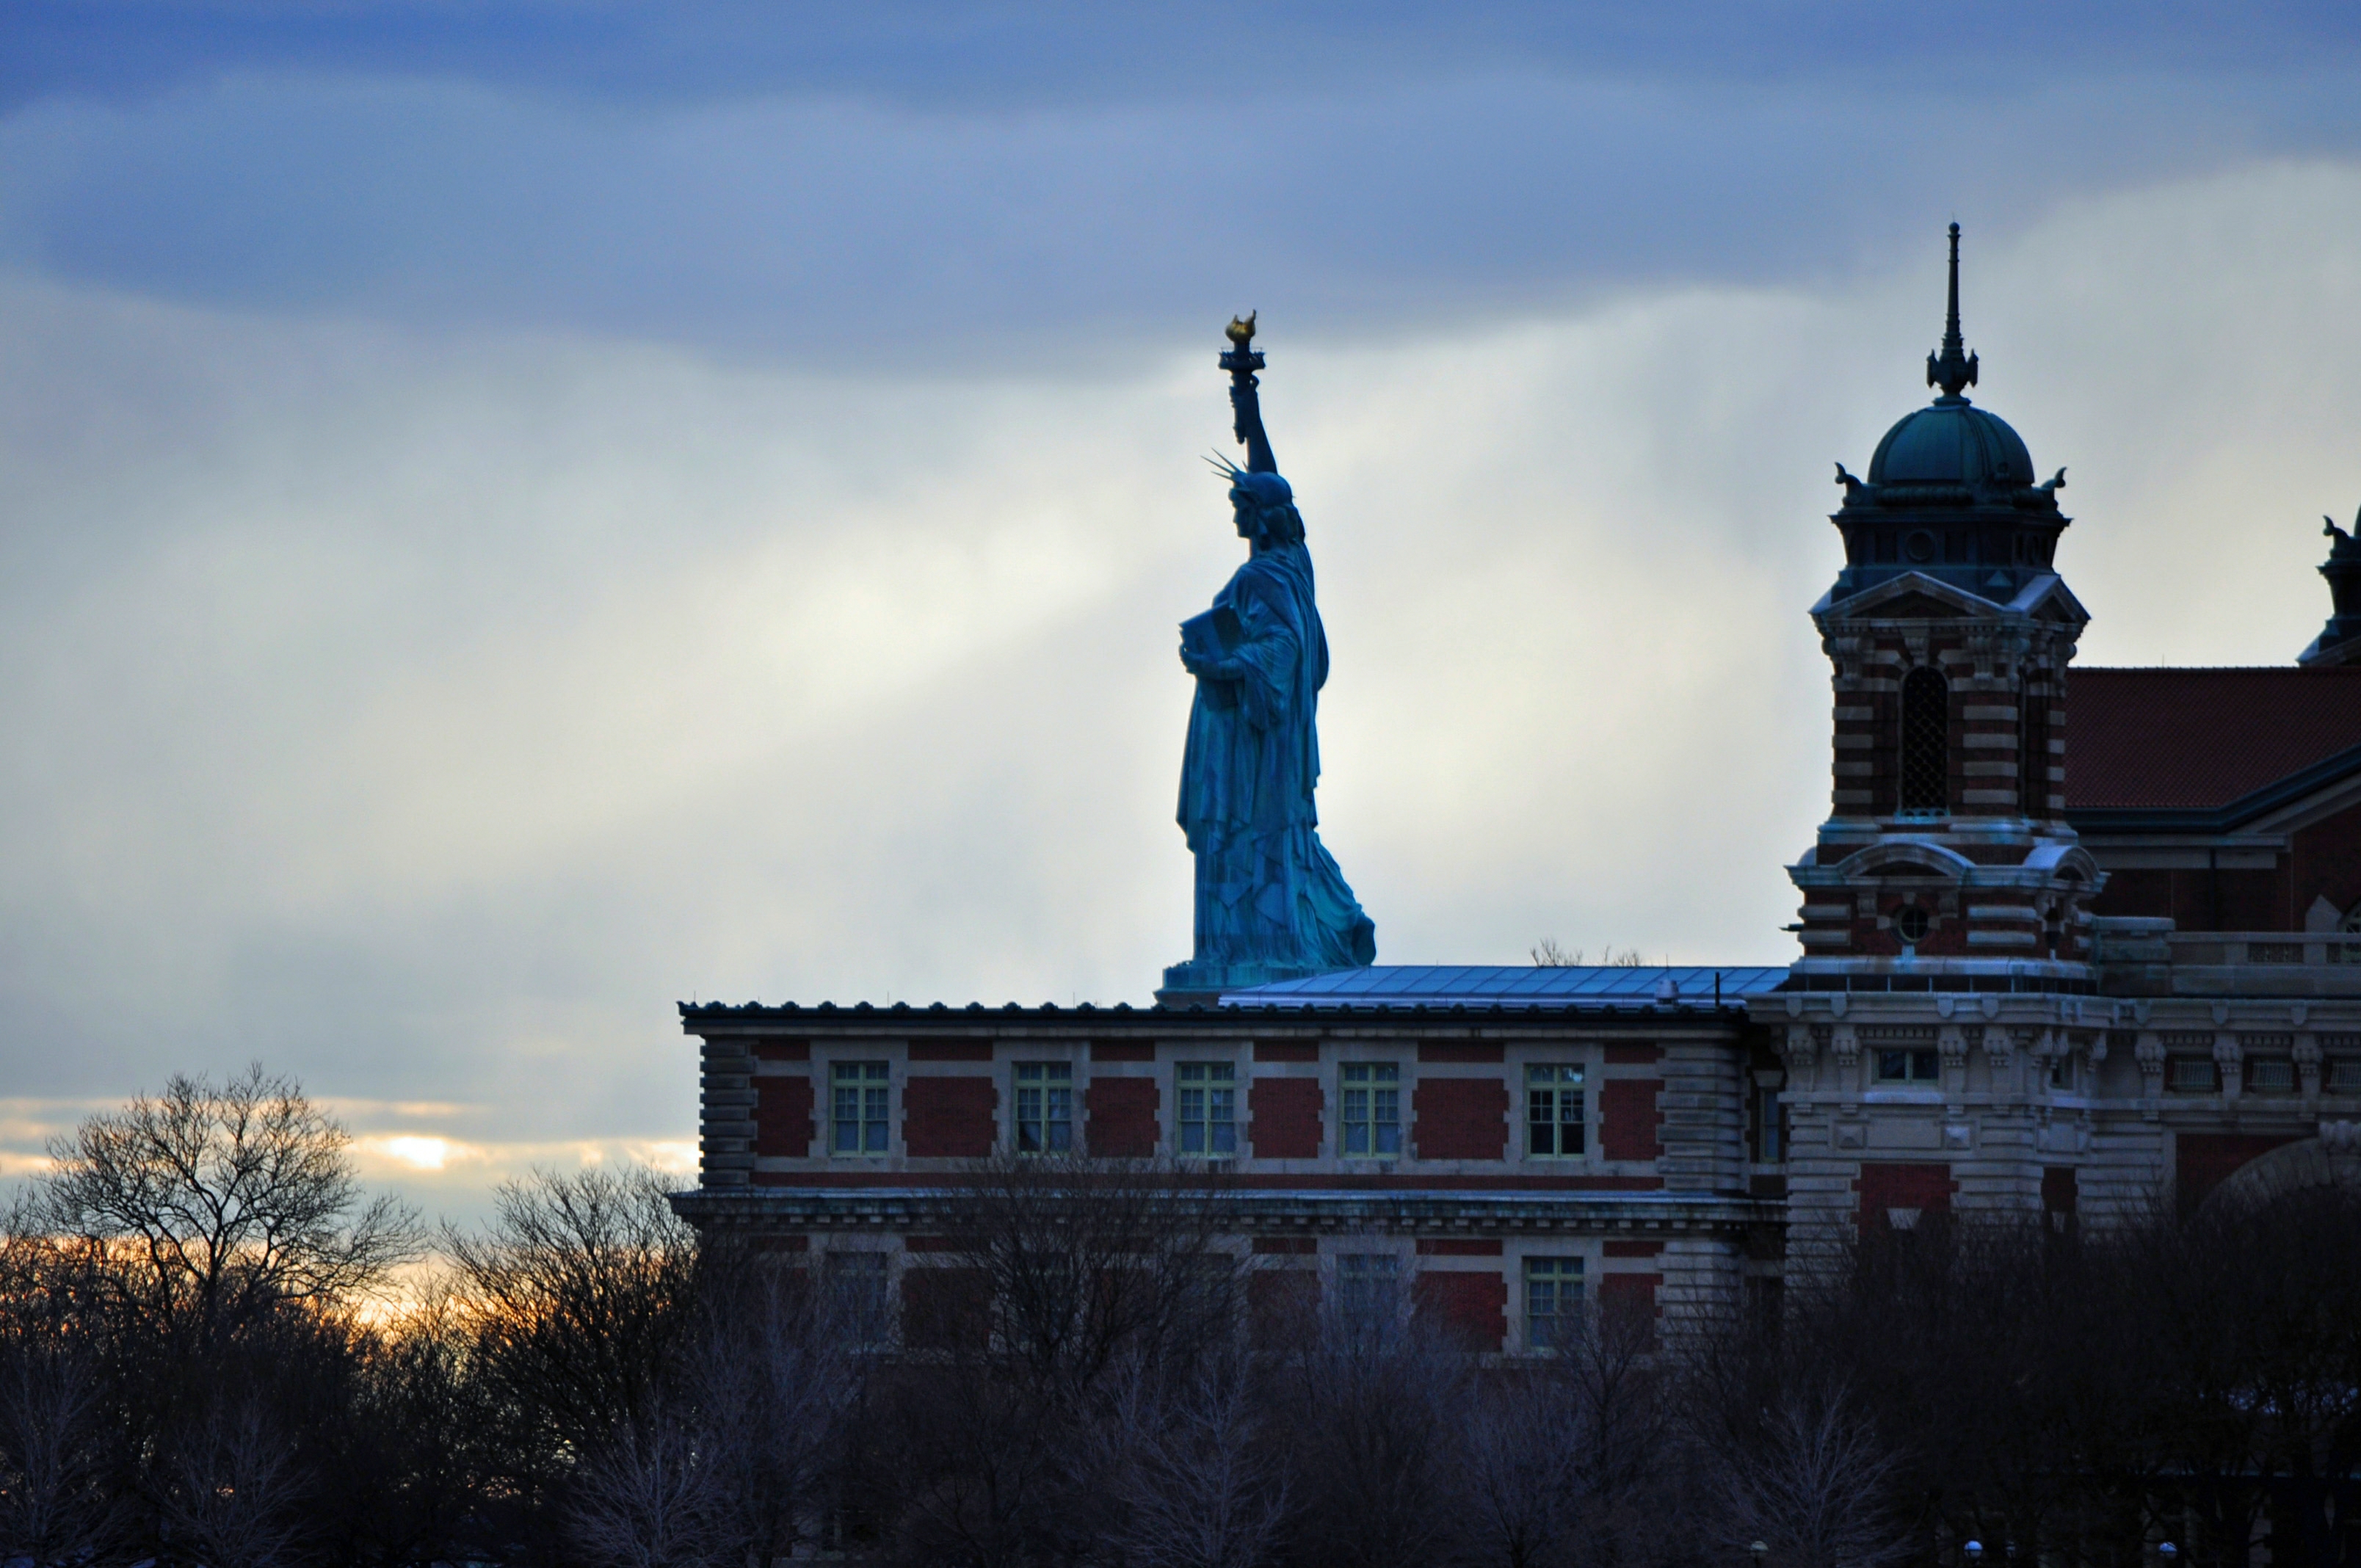 A photograph of Ellis Island with the Statue of Liberty in the background